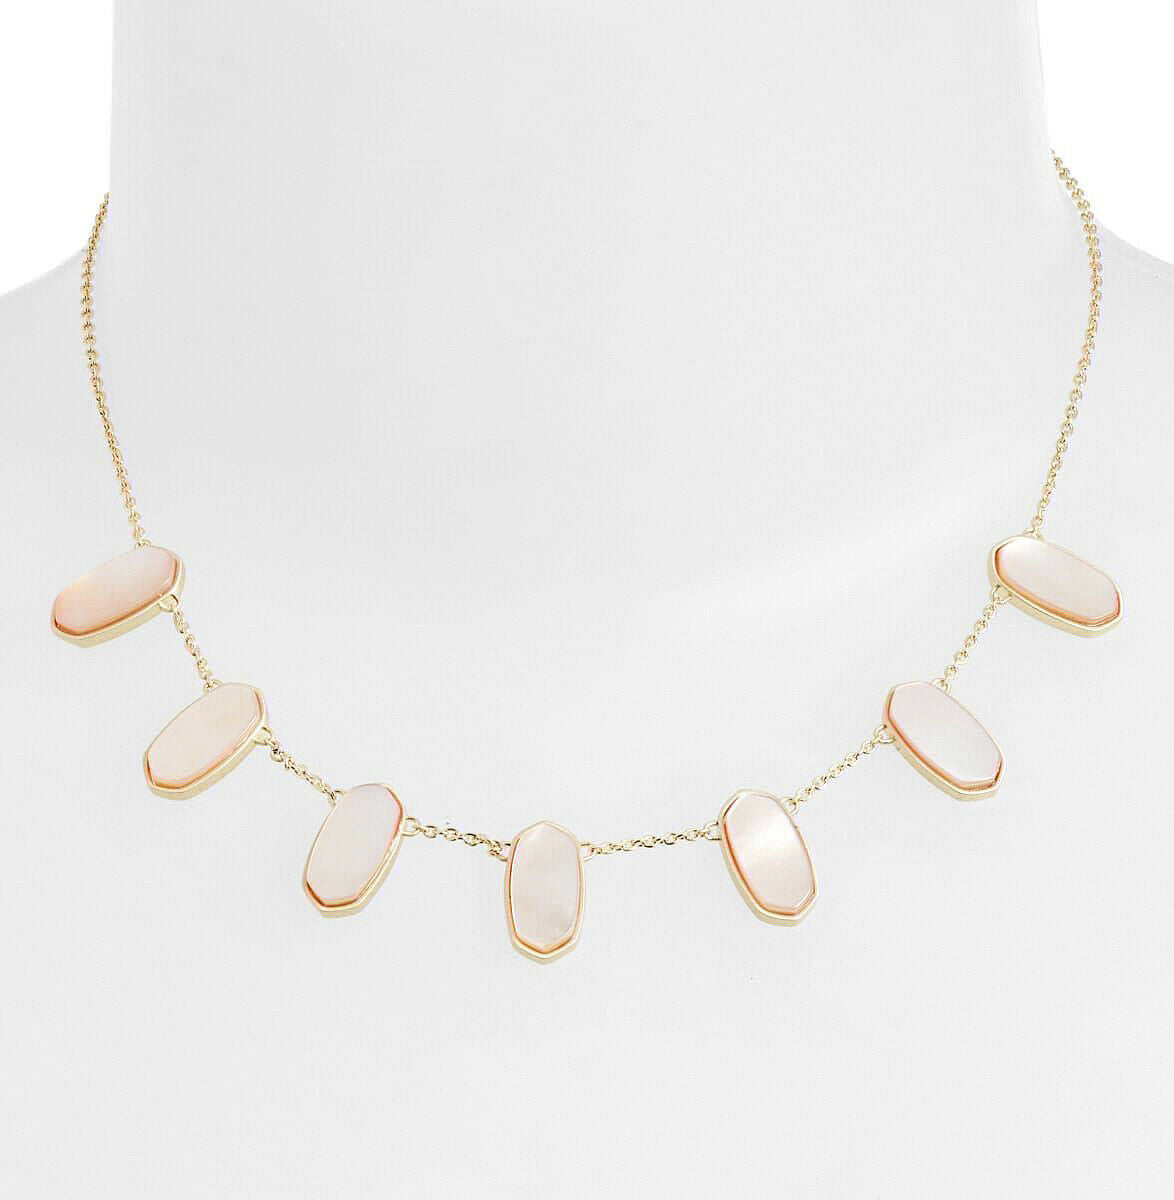 Kendra Scott Meadow Peach Mother of Pearl Station Necklace NWT